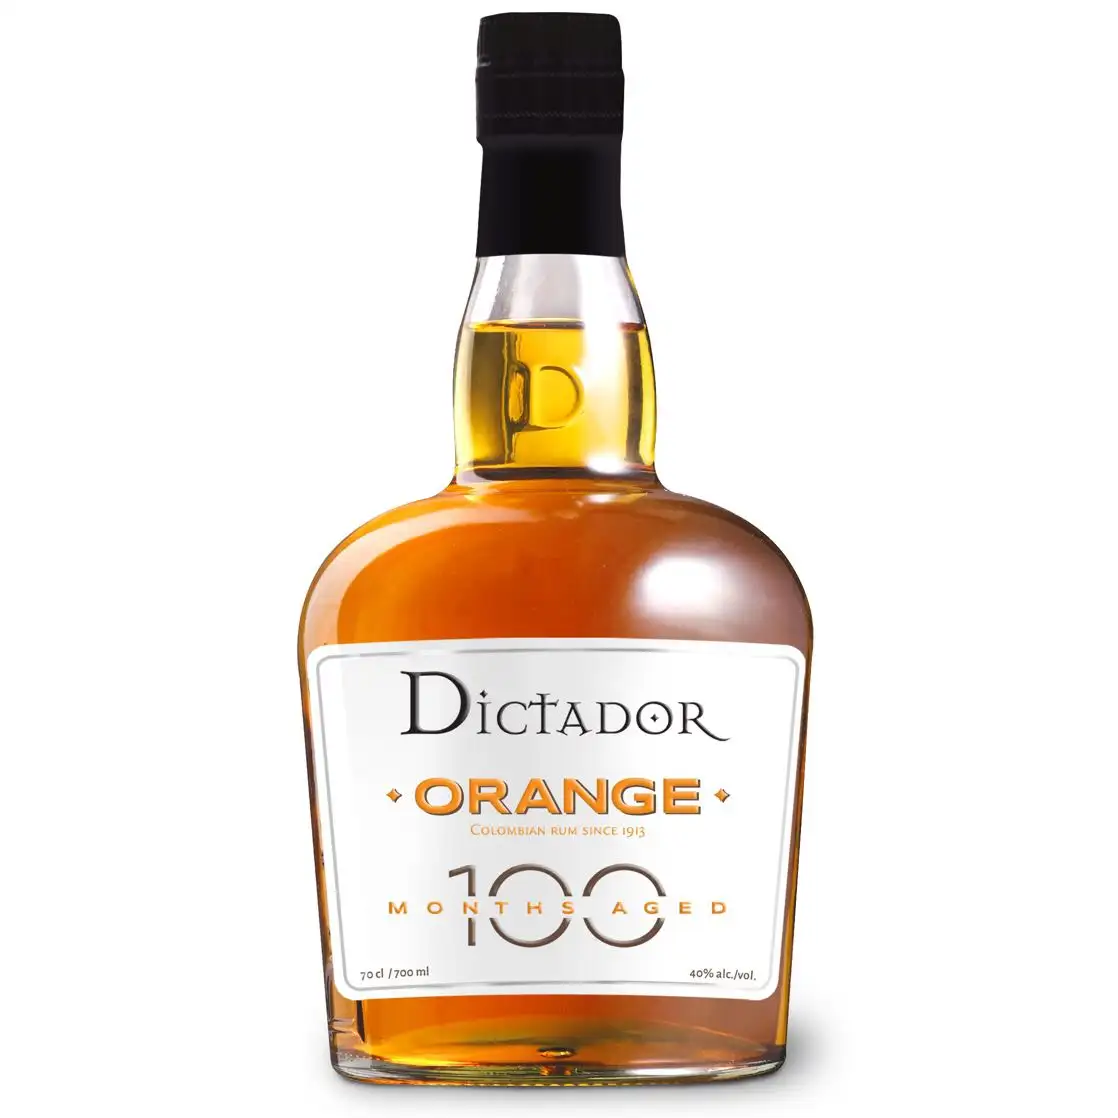 Image of the front of the bottle of the rum Dictador 100 Orange